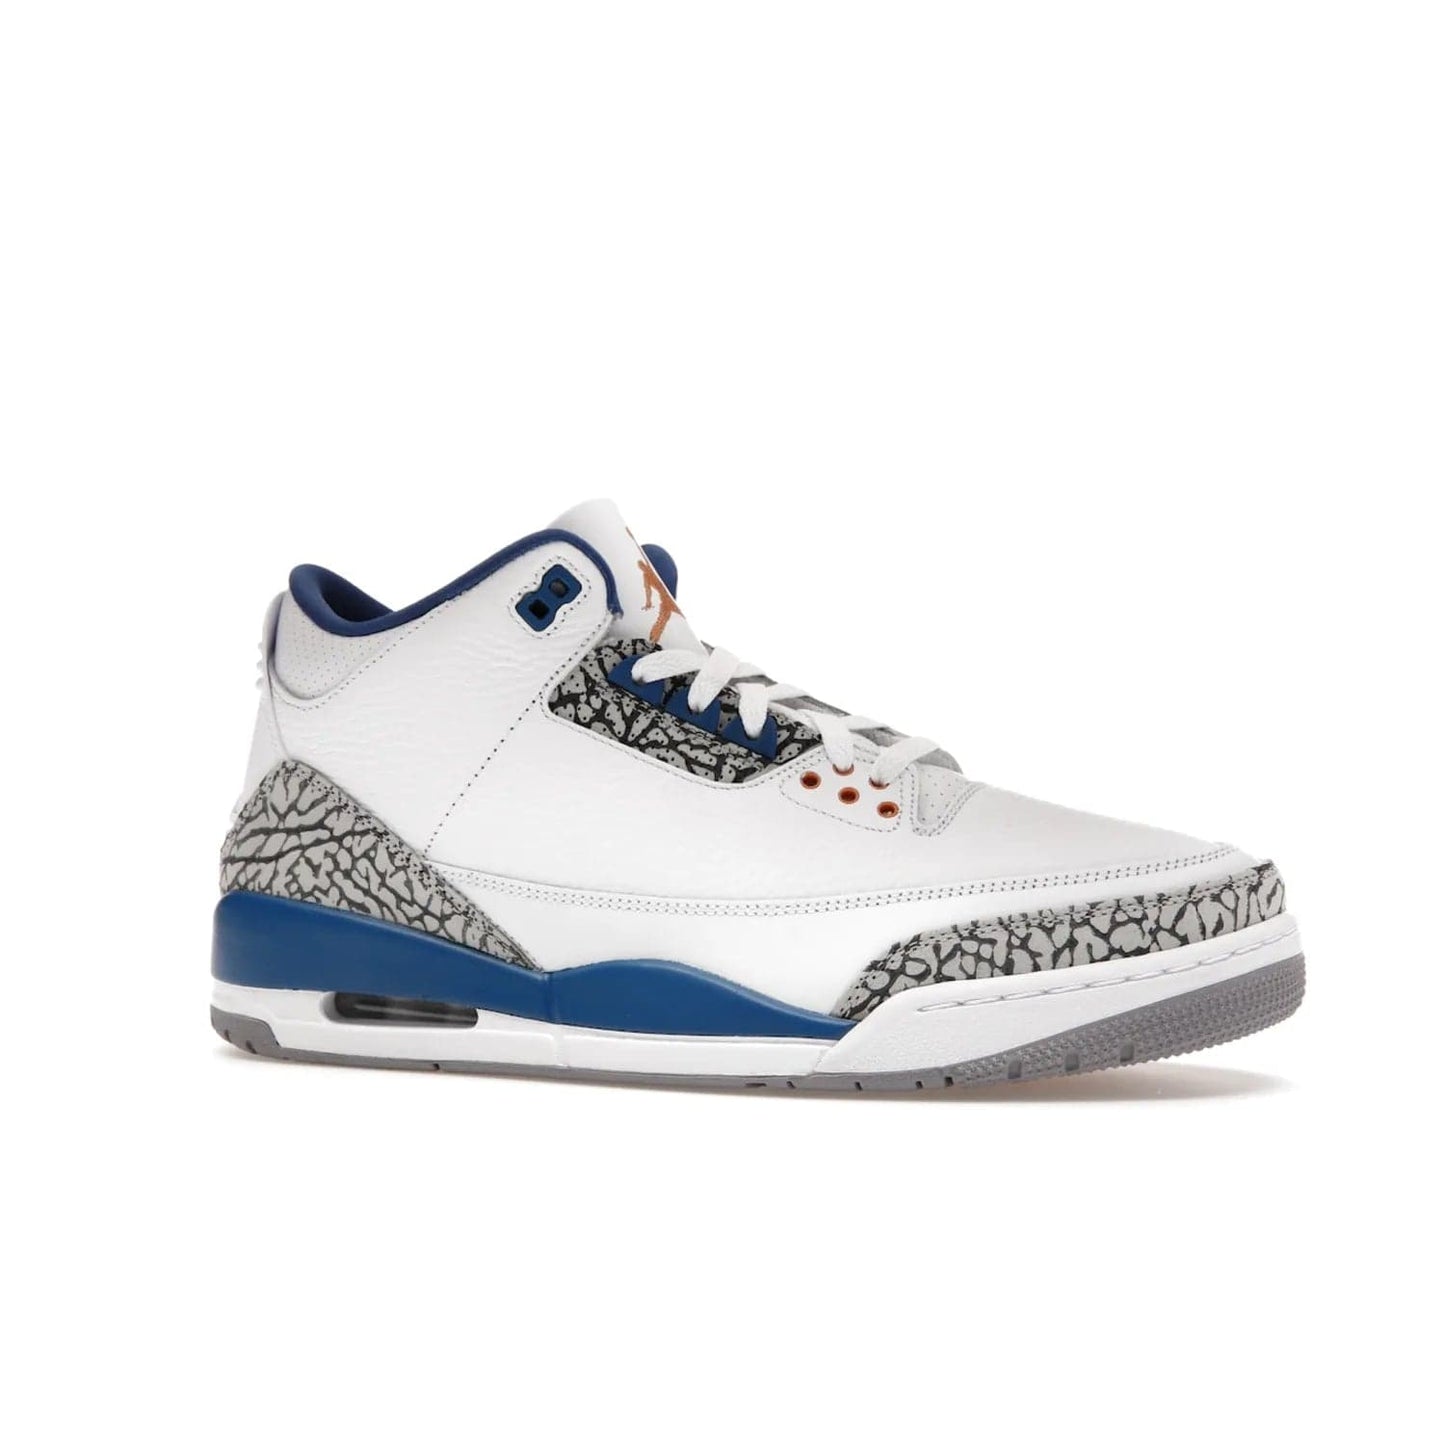 Jordan 3 Retro Wizards - Image 3 - Only at www.BallersClubKickz.com - ##
Special tribute sneaker from Jordan Brand to Michael Jordan's time with the Washington Wizards. Iconic white upper, orange Jumpman logo, blue accents, metallic copper details, and cement grey outsole. Buy the Air Jordan 3 Retro Wizards April 29, 2023.